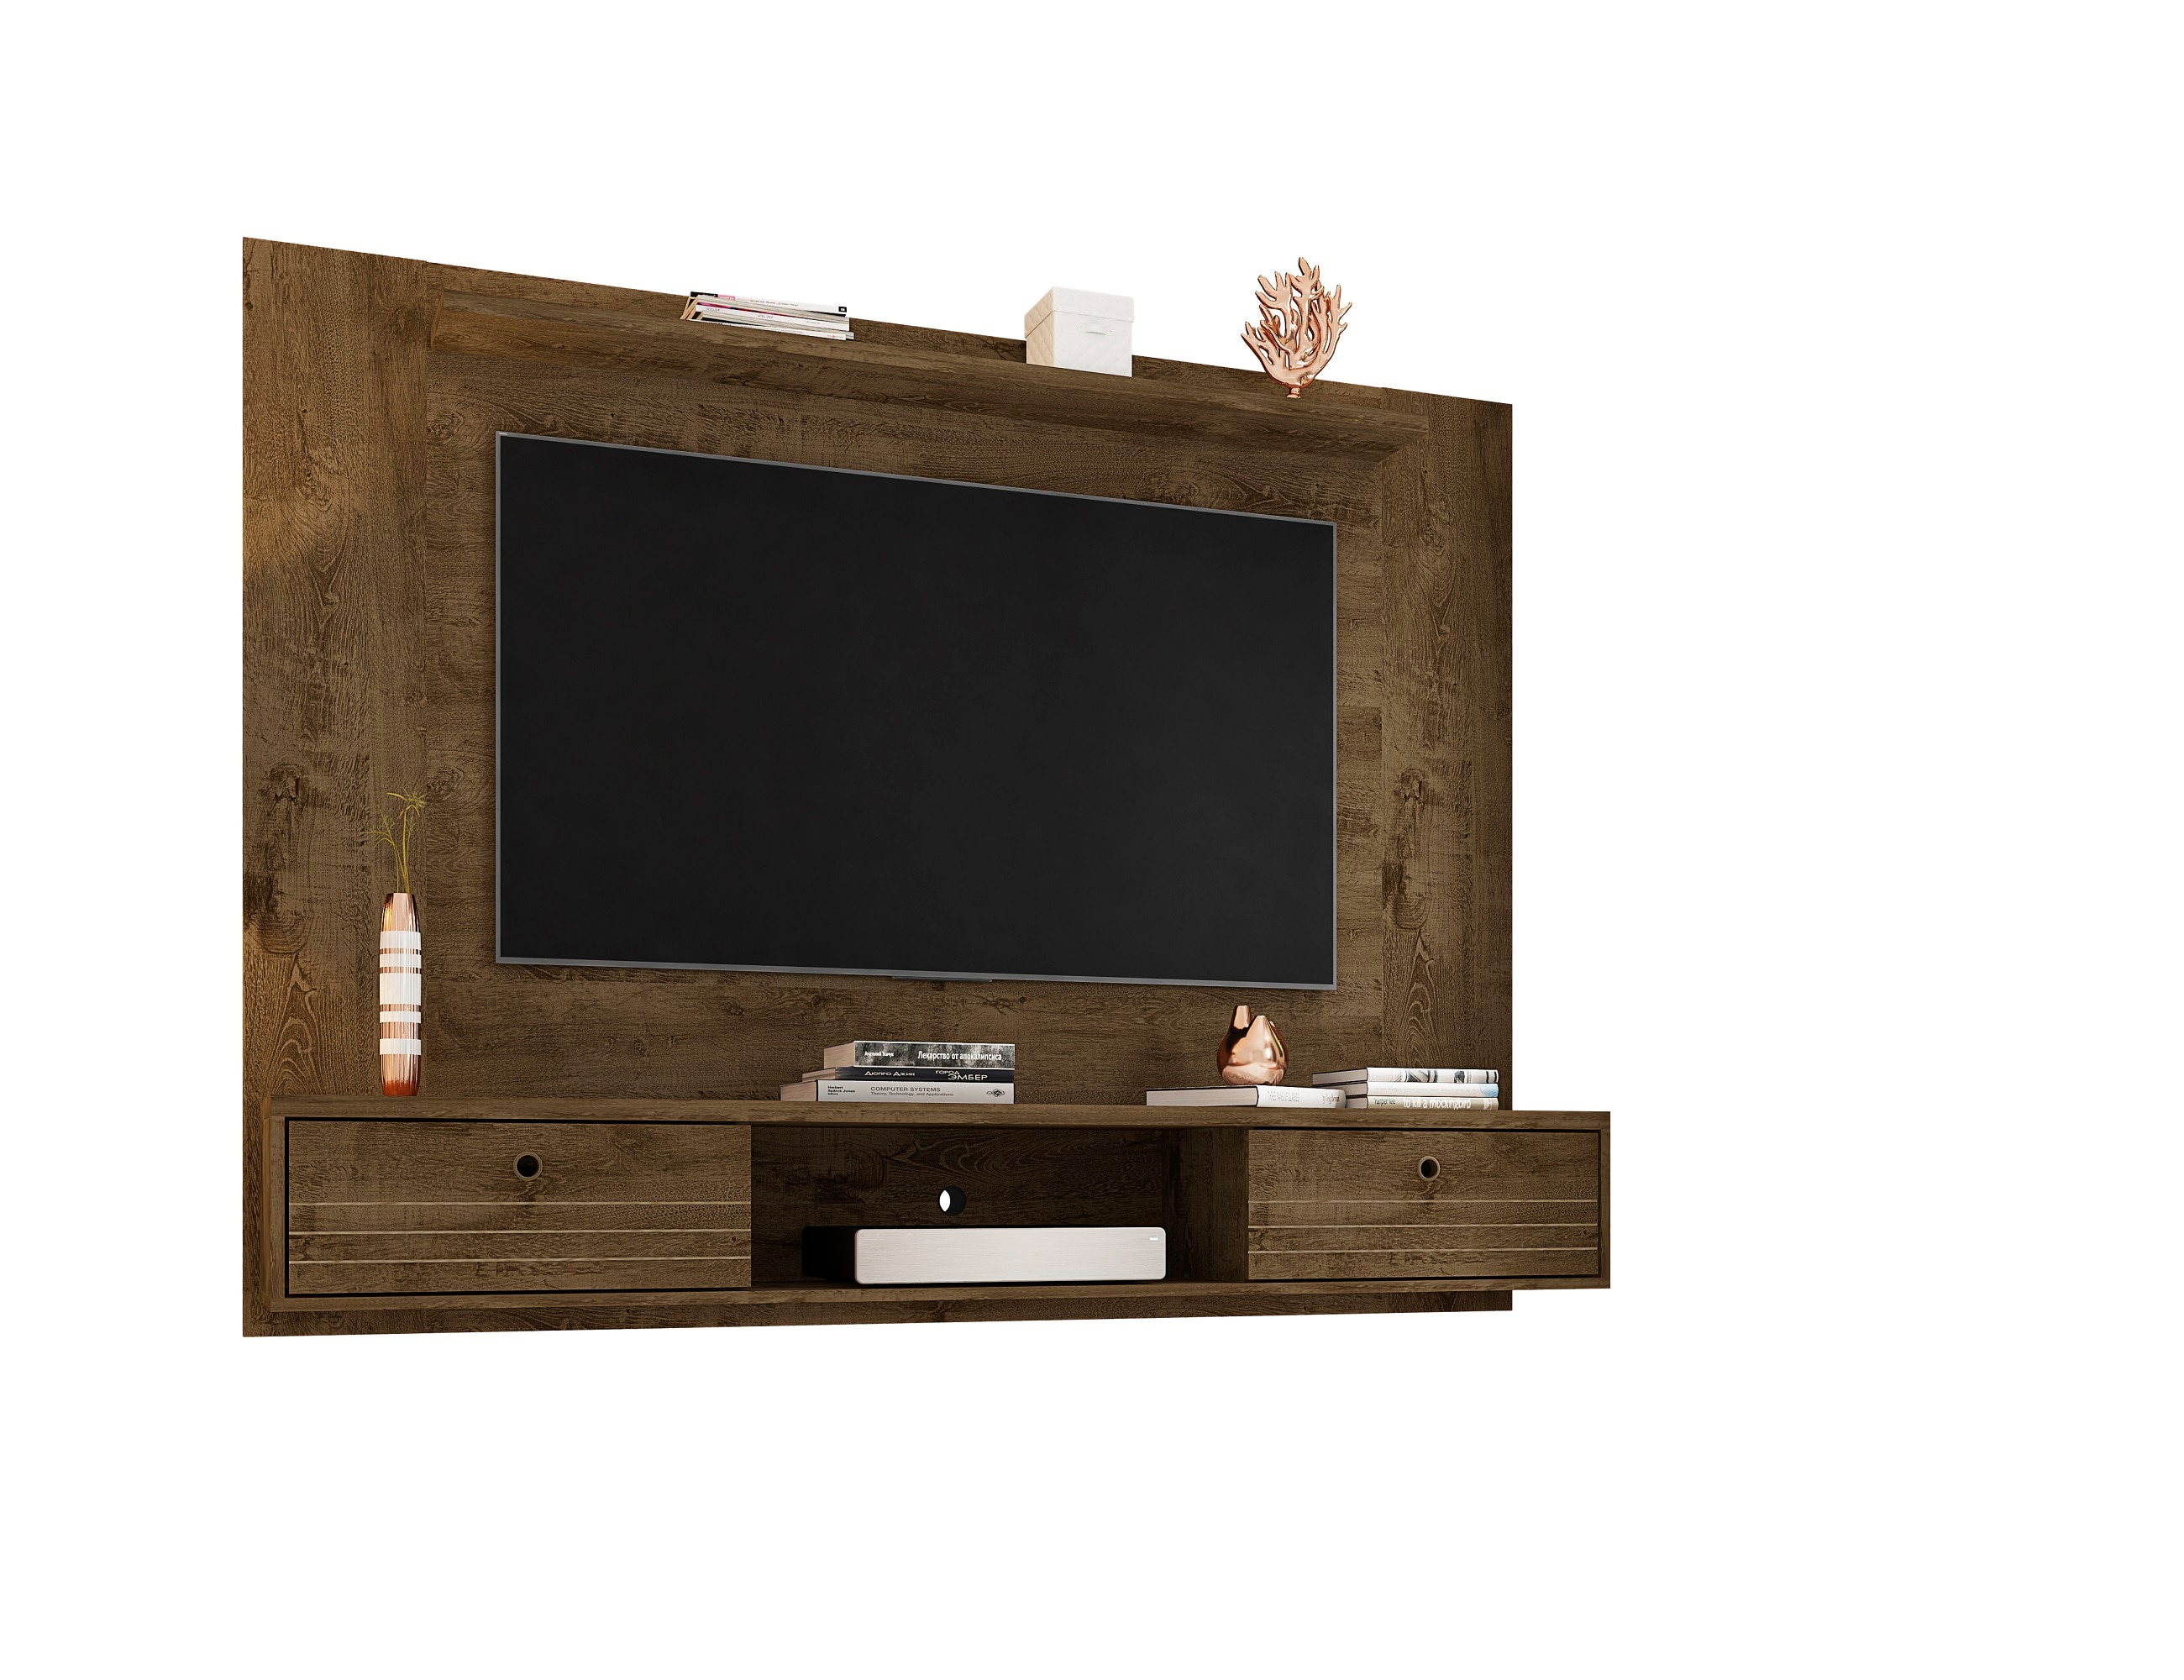 Tuscany Contemporary Curve Wall Mounted TV Cabinet